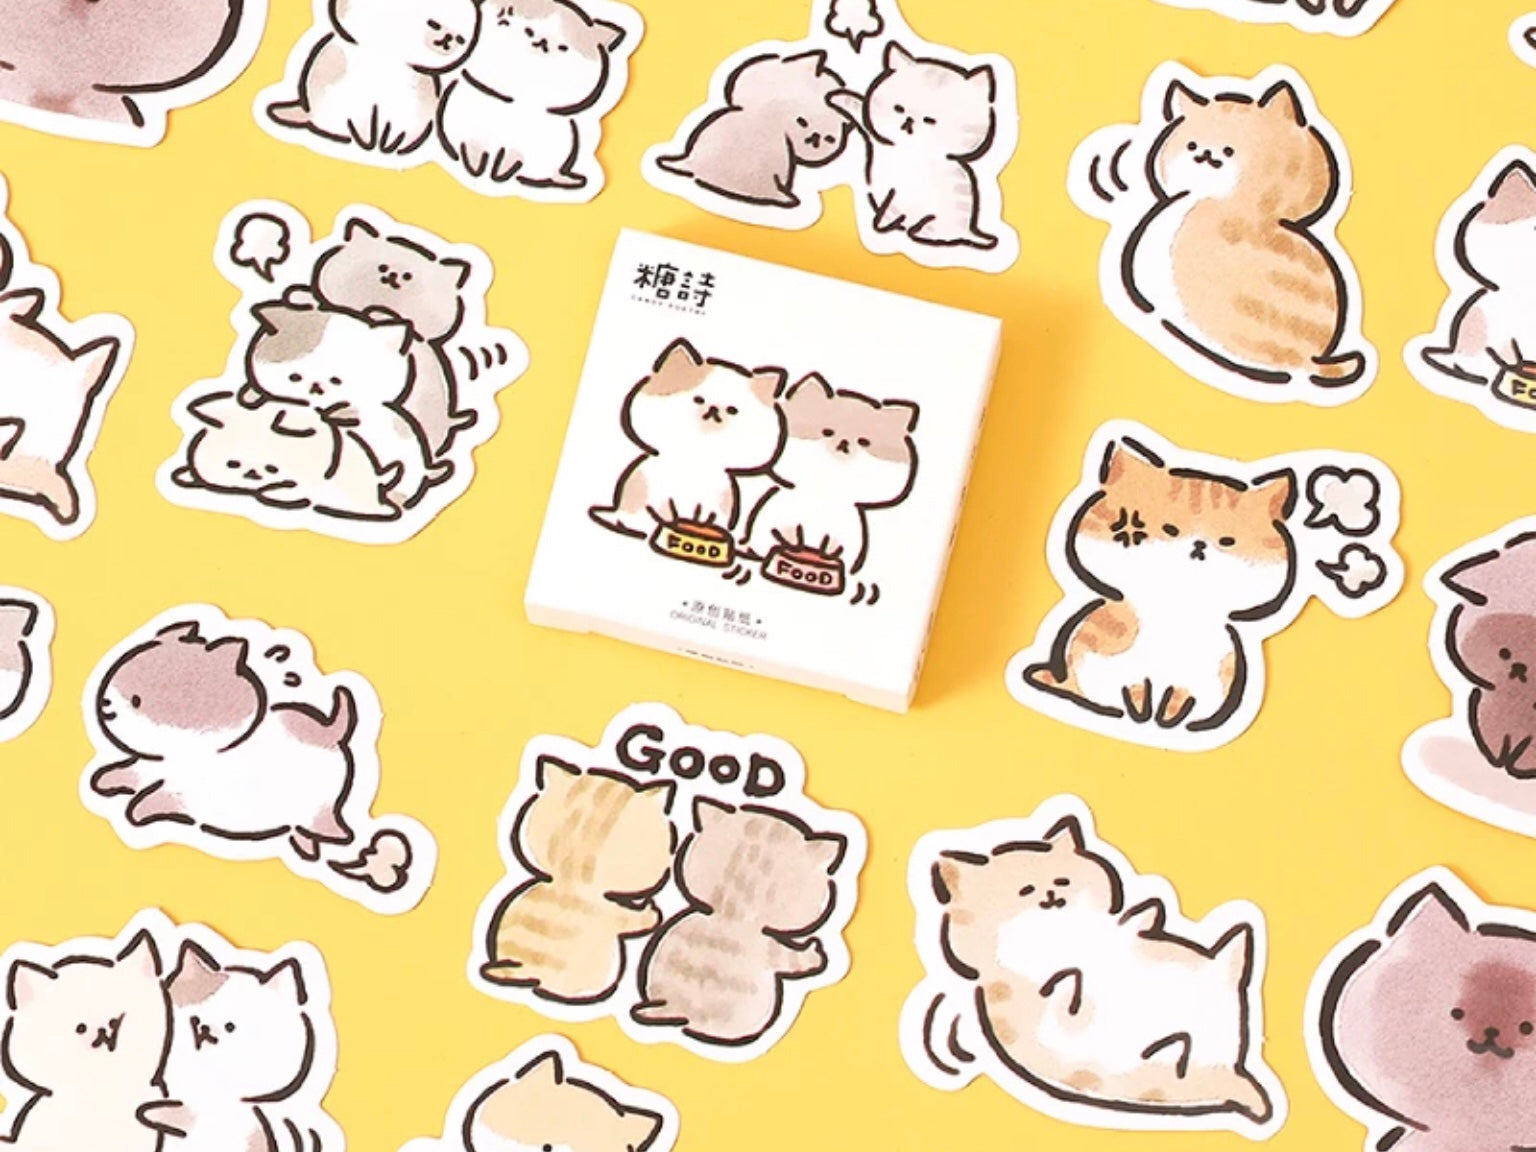 48 pc. Adorable Sanrio Sticker Collection, Journal Stickers, Kawaii  Stickers